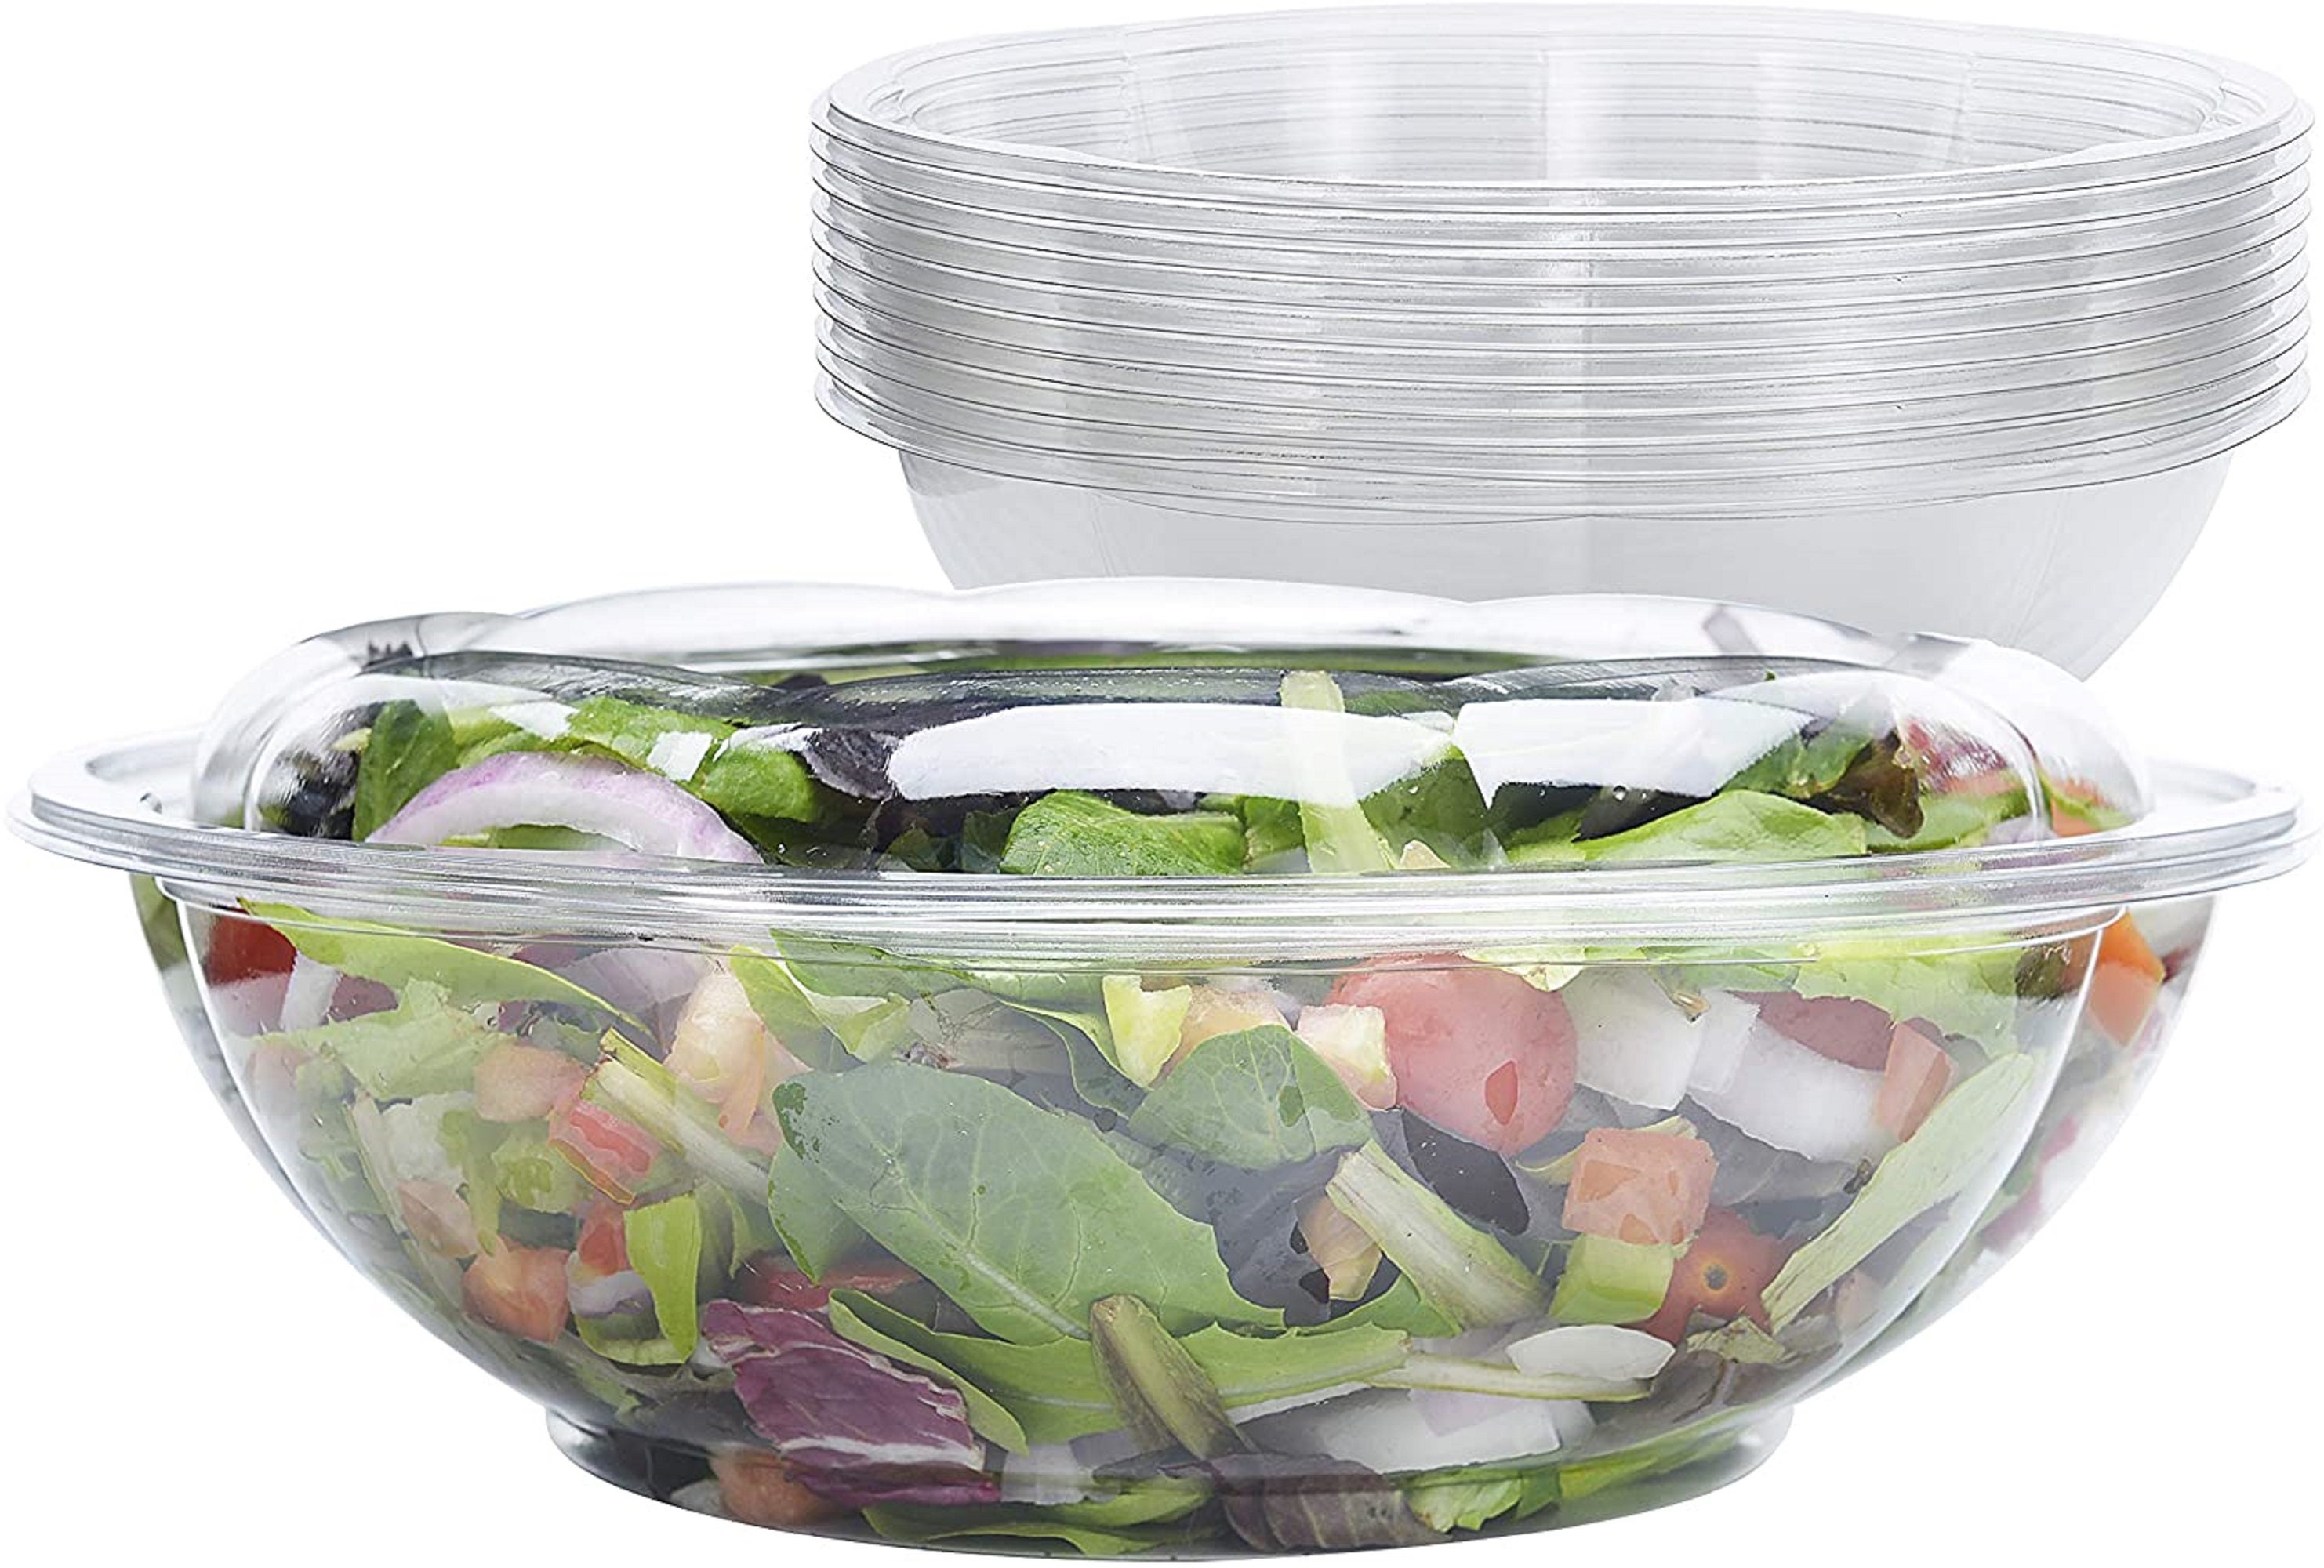 Rush Bowls 16oz US Made Plastic Deli Container - 500ct - Frozen Solutions